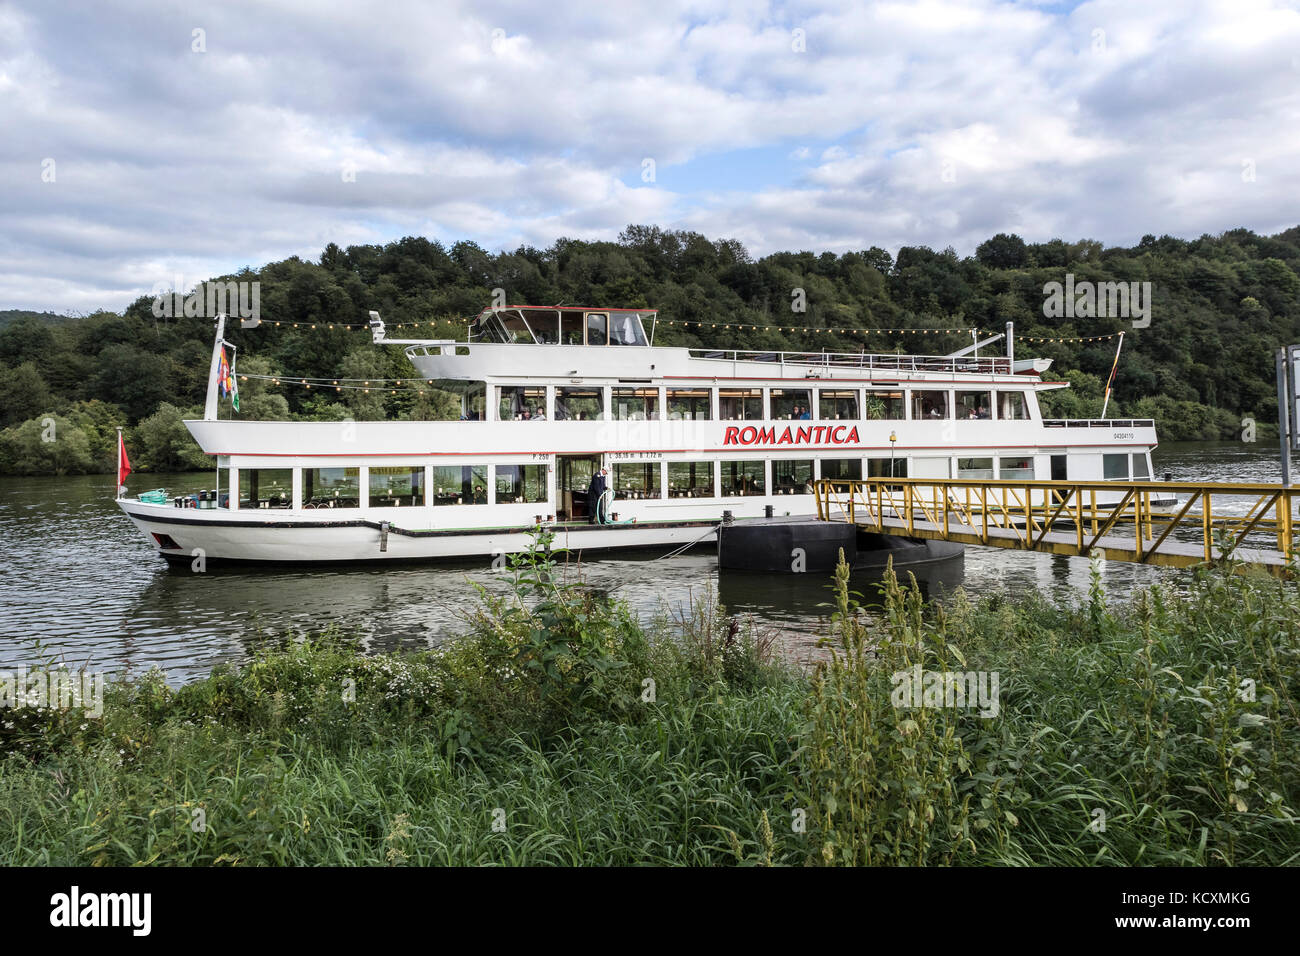 Pleasure Boat, Romantica on the Mosel River, Germany, moored at Krov. Stock Photo